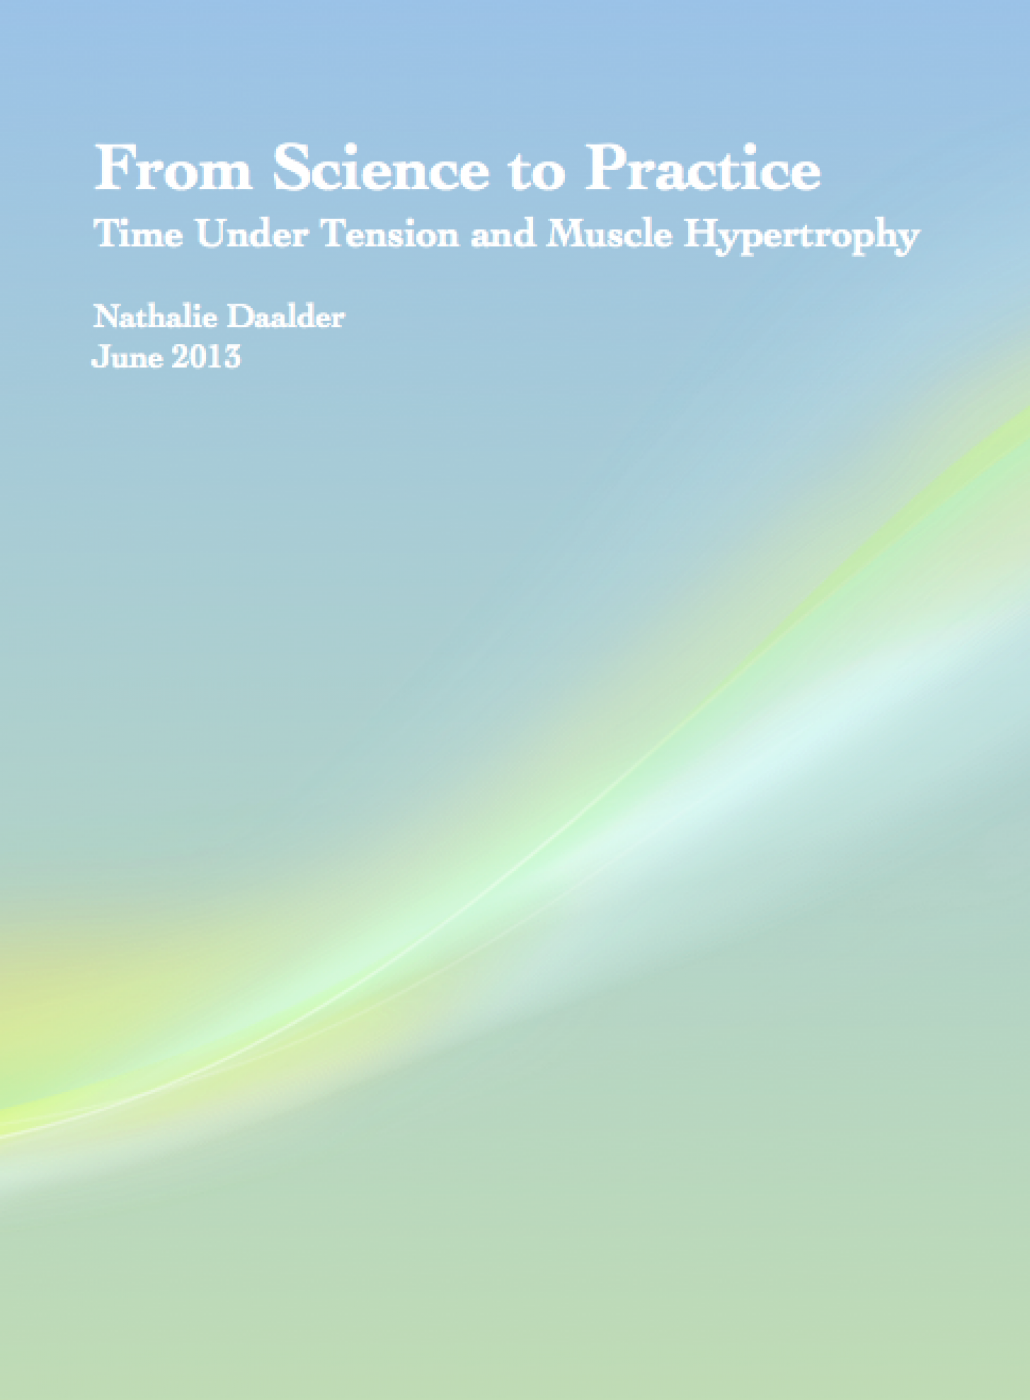 Time Under Tension and Muscle Hypertrophy